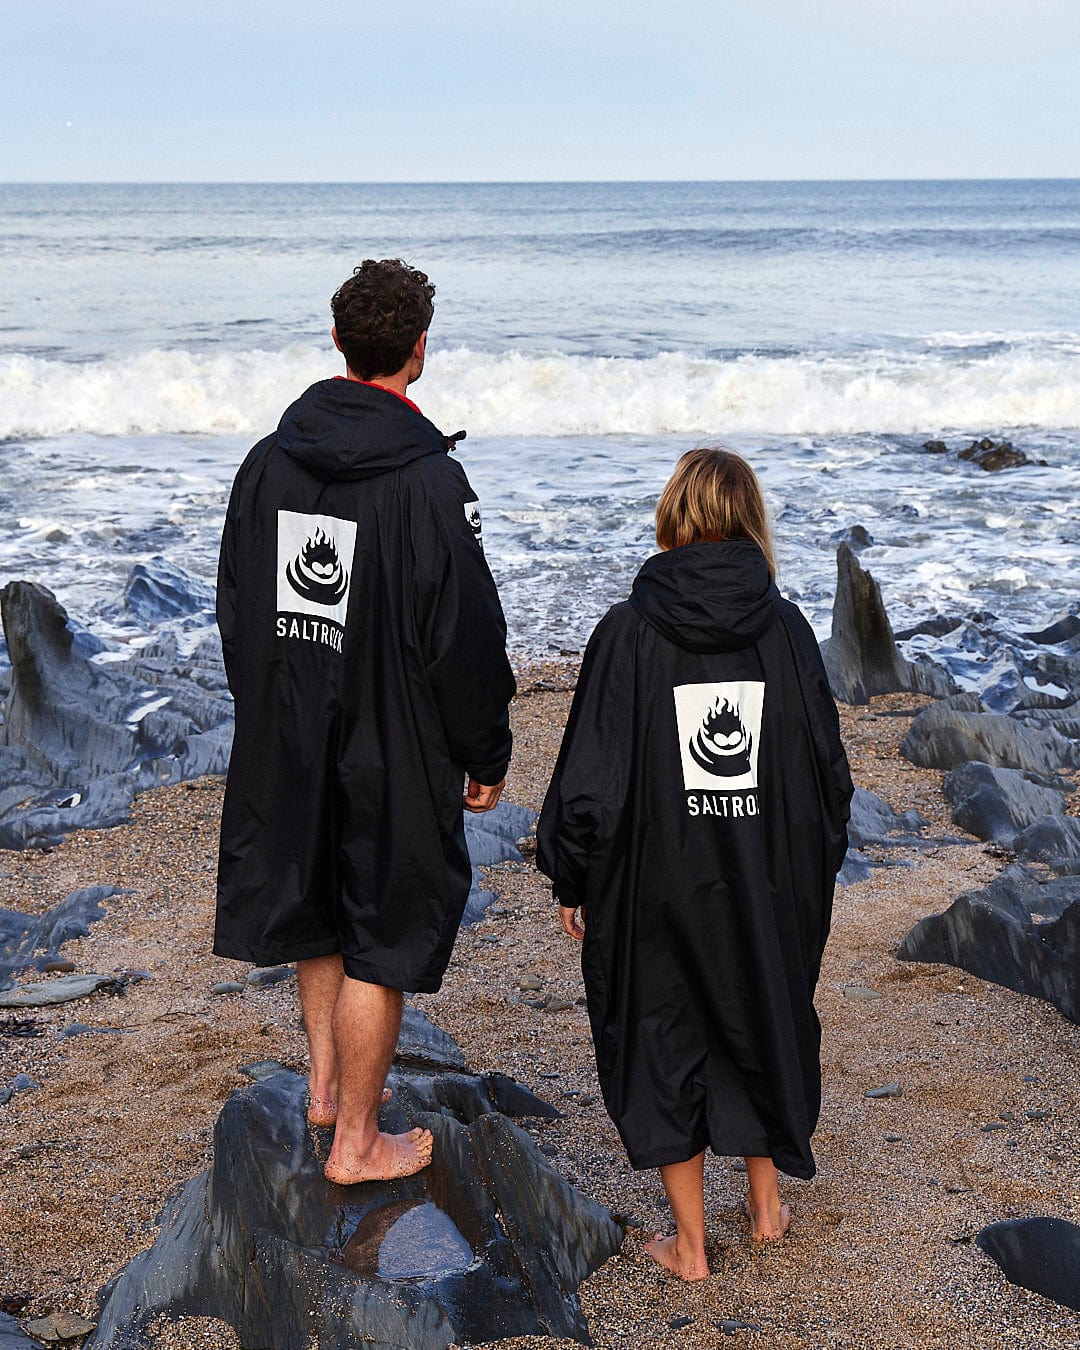 Two people in black Recycled Four Seasons Changing Robes with Saltrock logos standing on a rocky beach looking at the ocean waves.